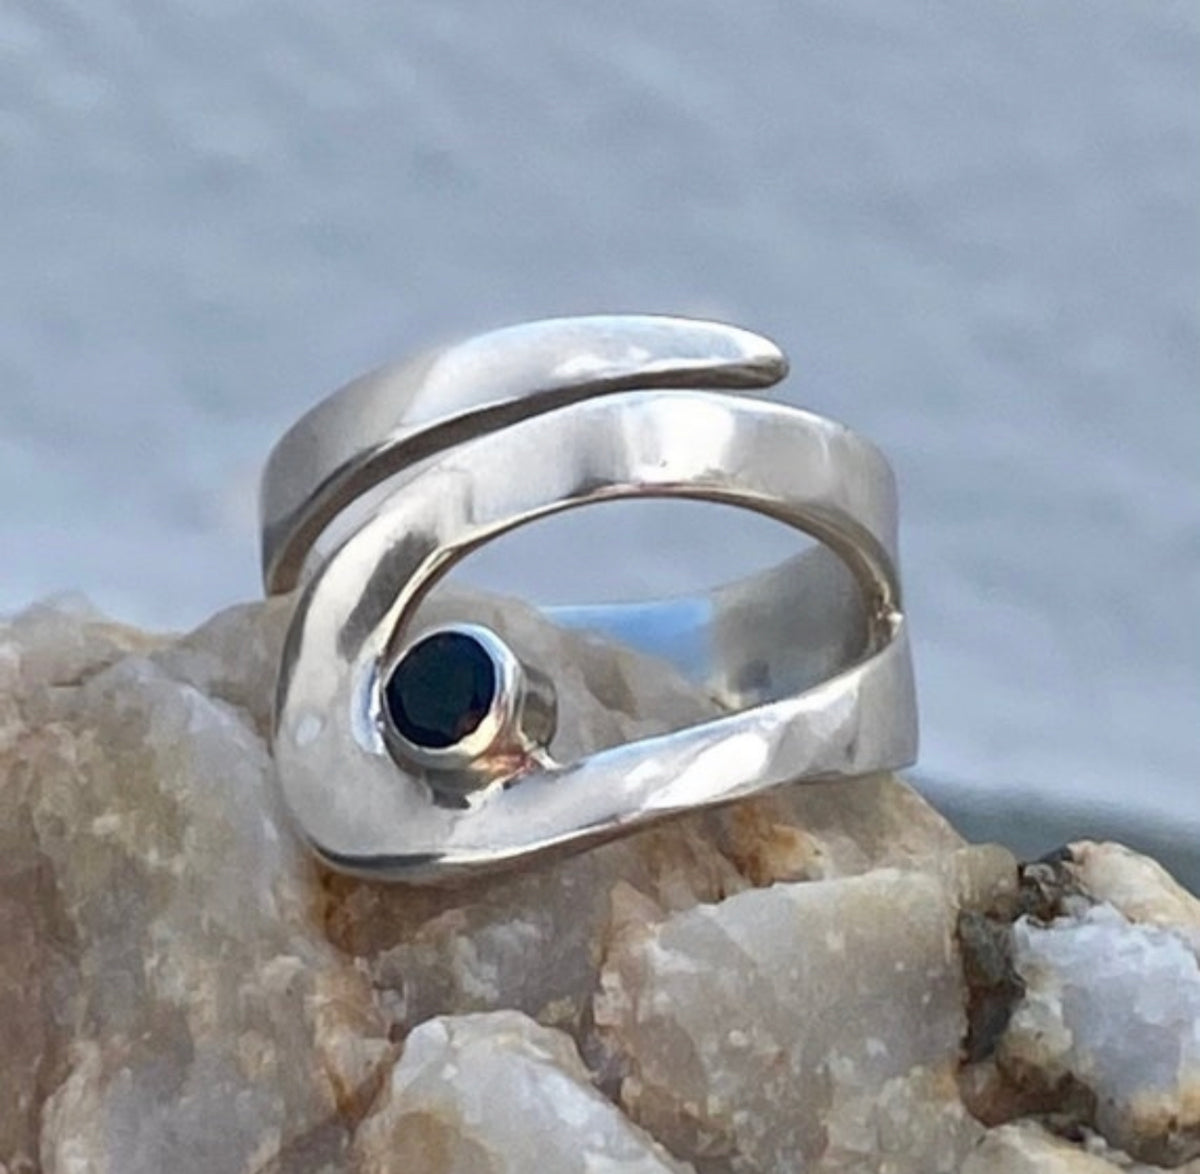 silver ring with black gemstone